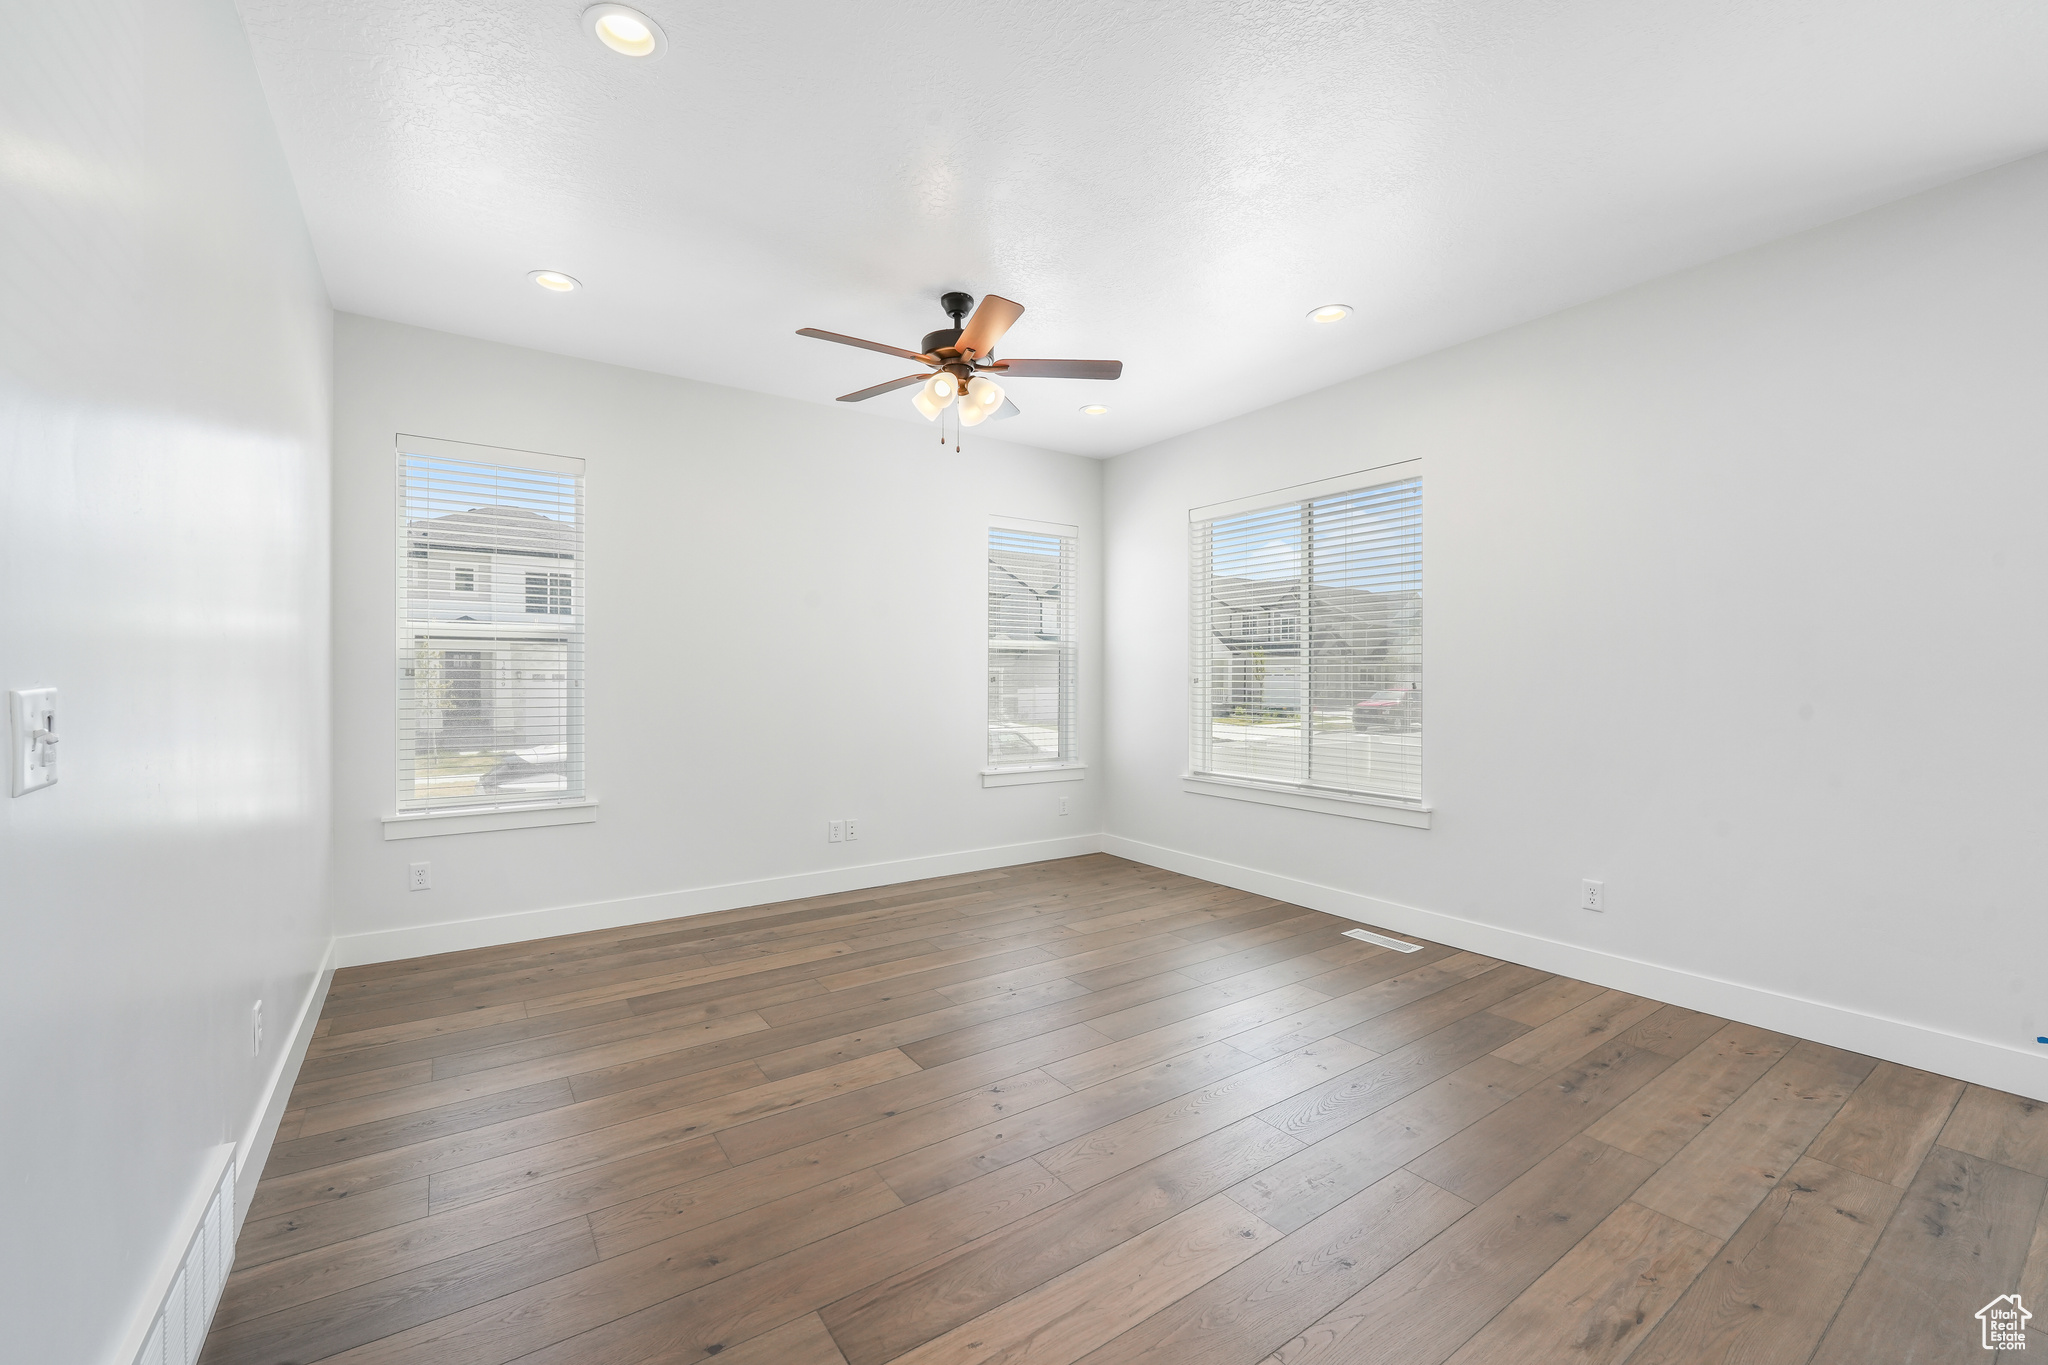 Spare room with dark hardwood / wood-style flooring and ceiling fan